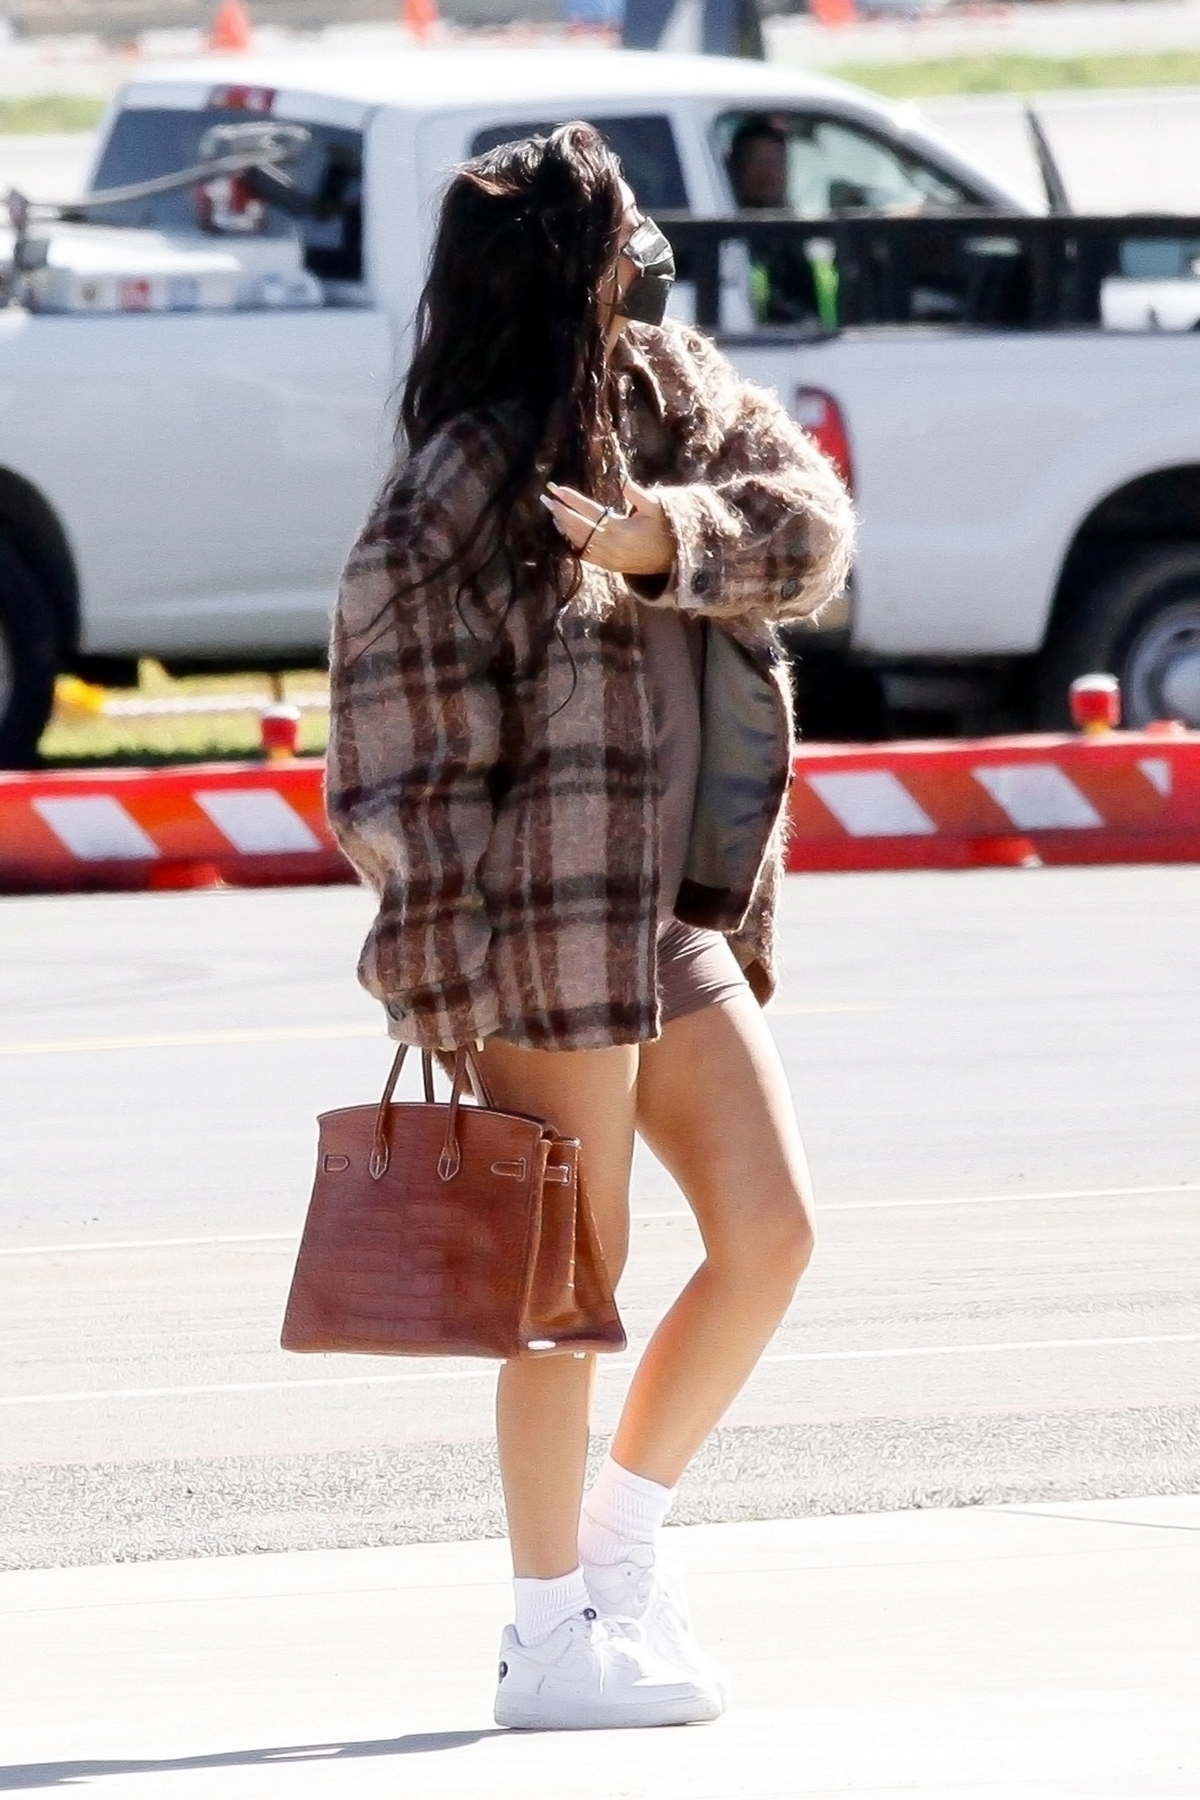 Kylie Jenner Puts On A Leggy Display While Boarding A Private Jet With Her Daughter Stormi In